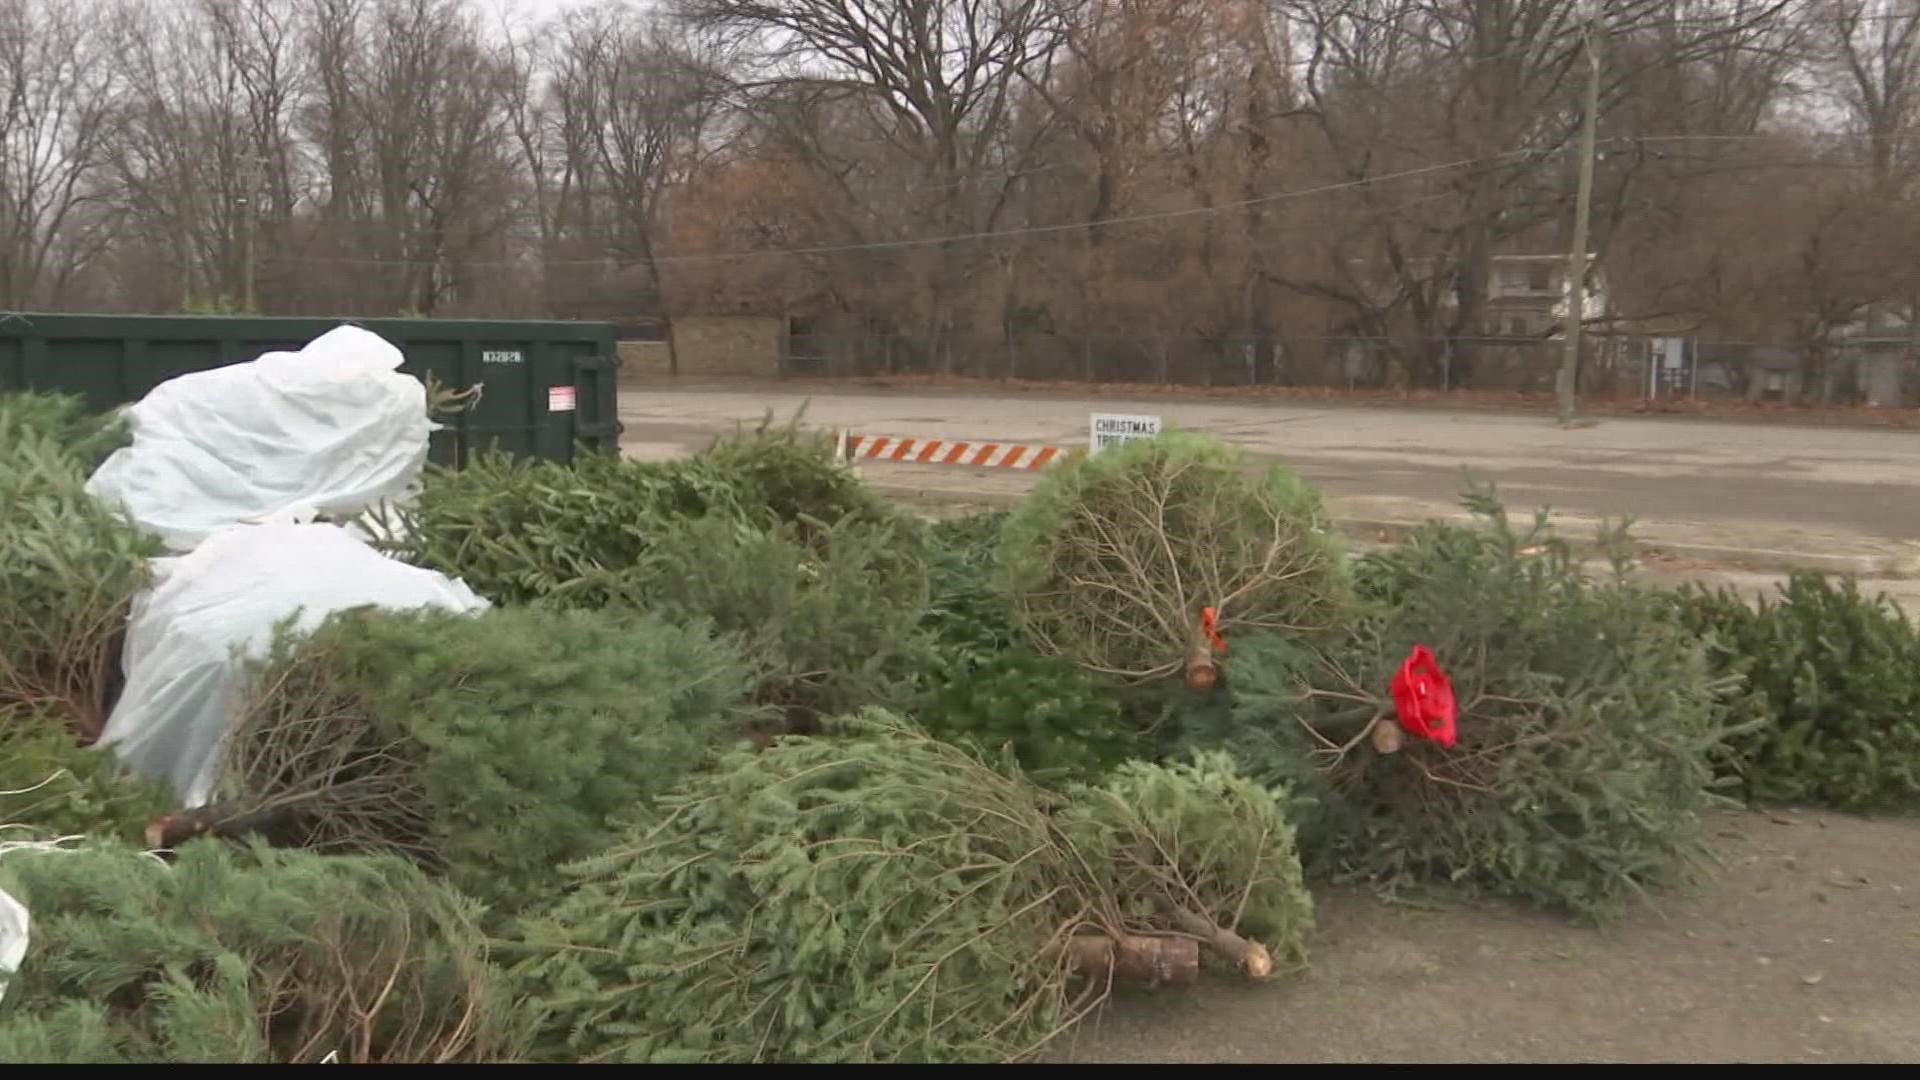 Marion County residents can drop off their live trees at eight drop-off points in public parks throughout Indianapolis.